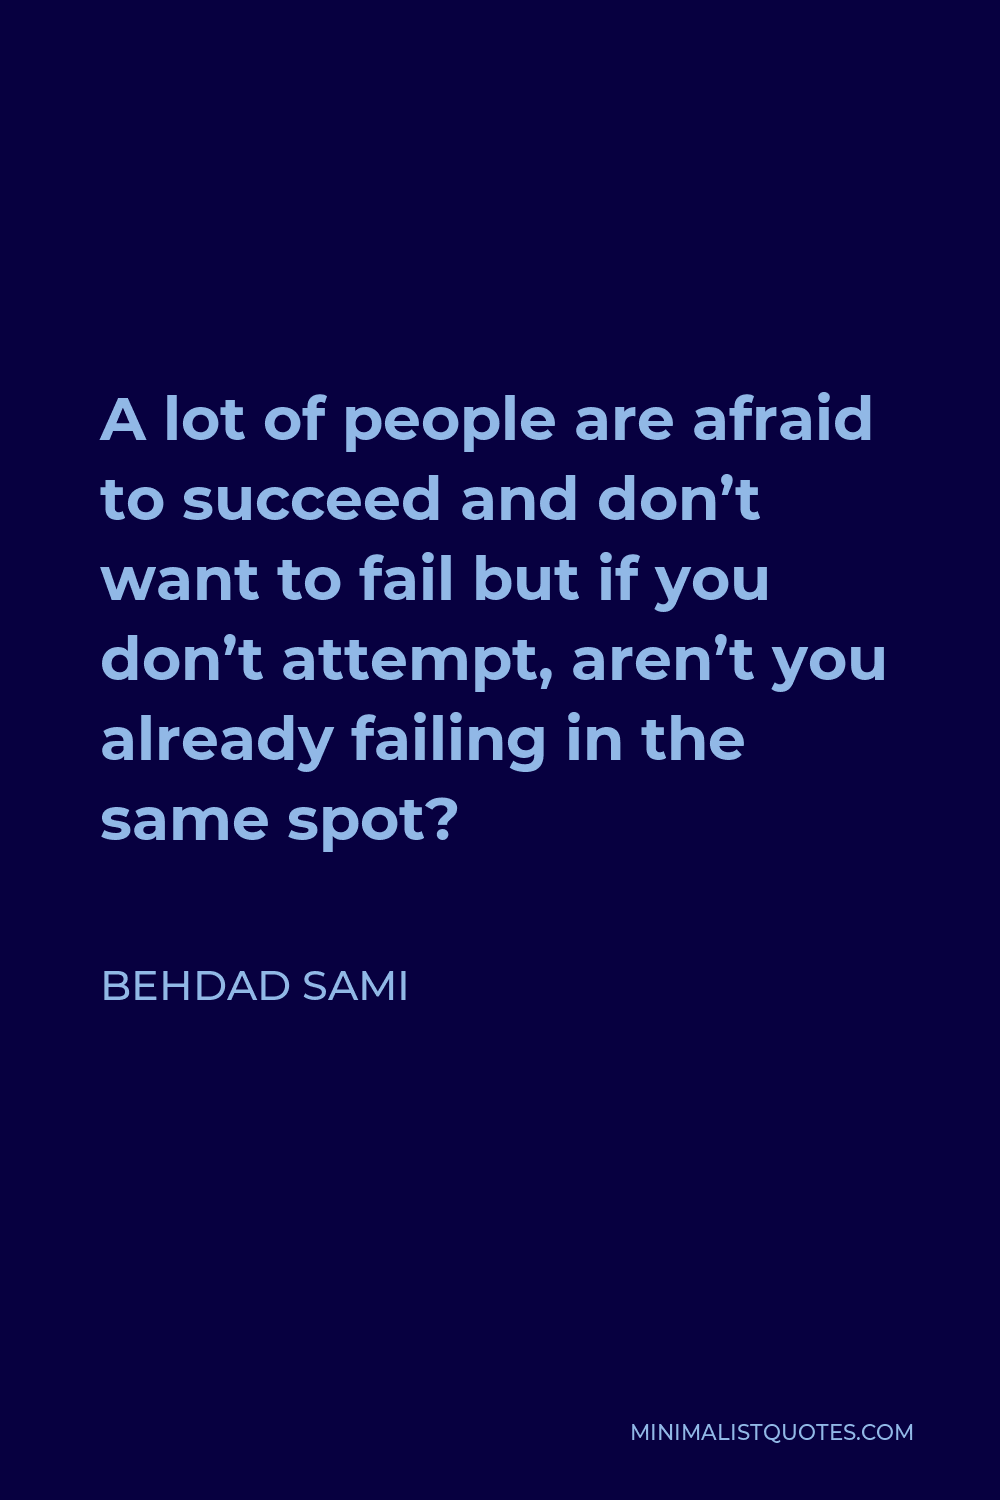 Behdad Sami Quote - A lot of people are afraid to succeed and don’t want to fail but if you don’t attempt, aren’t you already failing in the same spot?